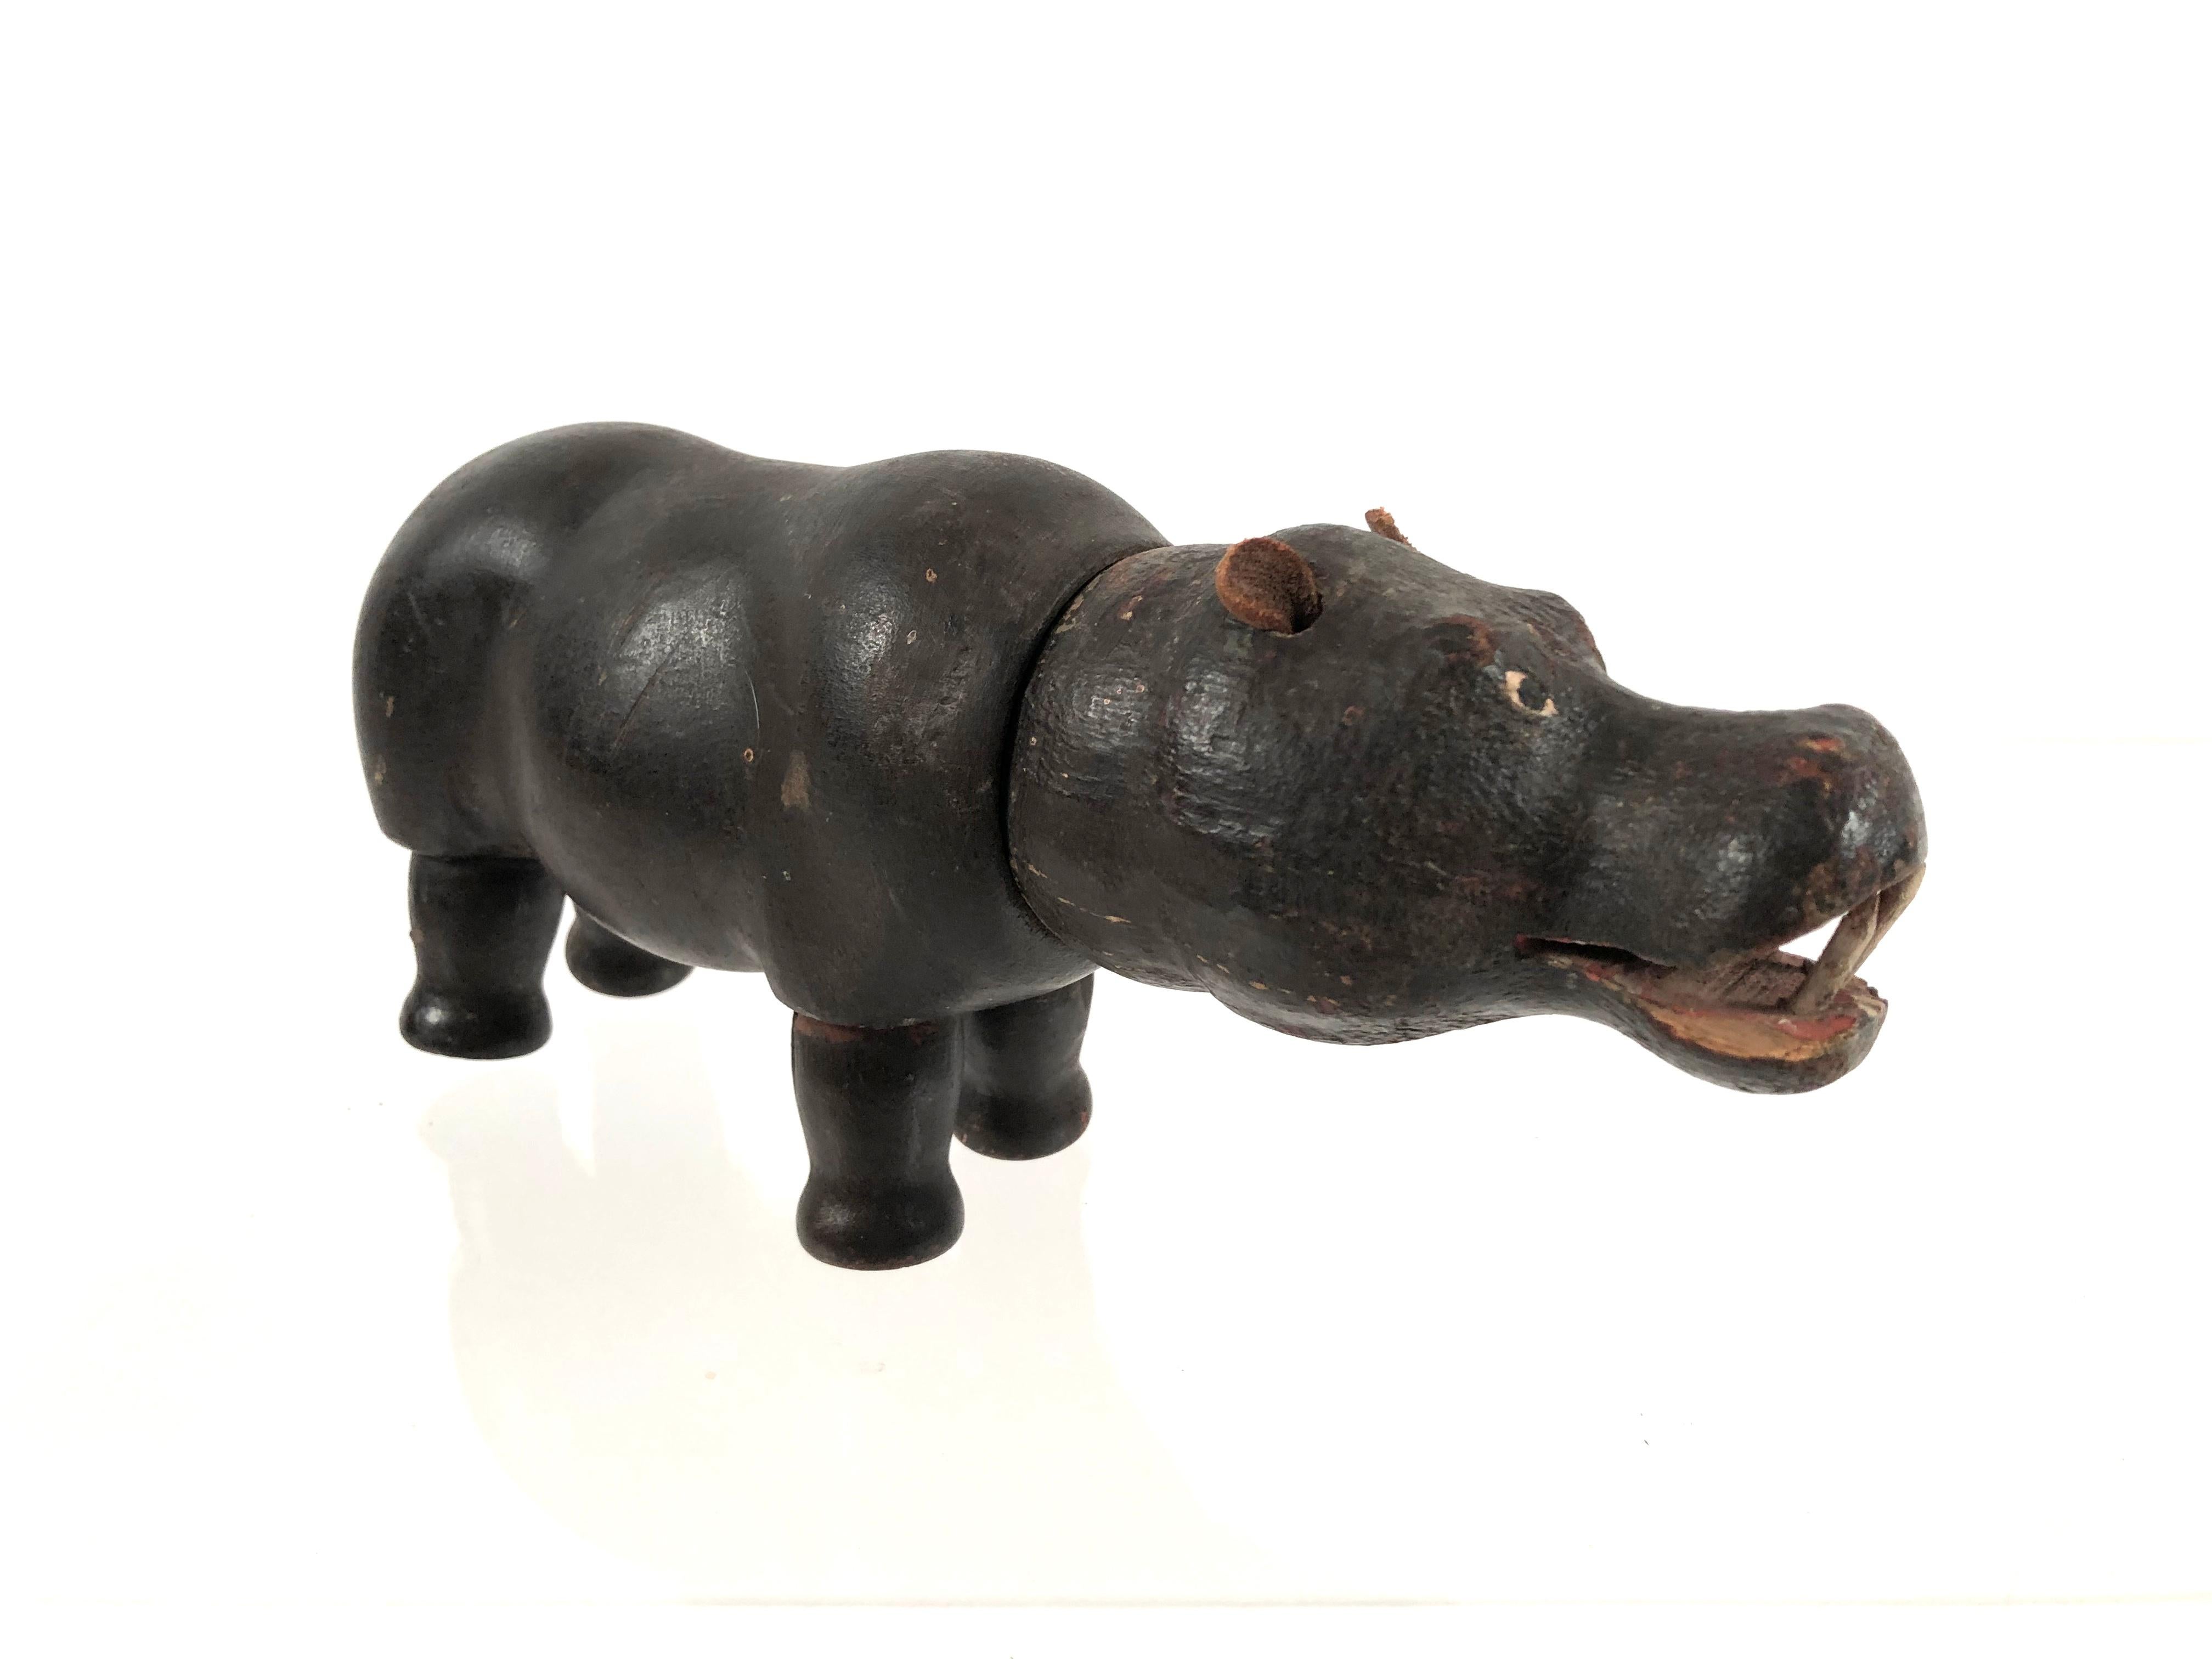 A painted wood toy hippopotamus with leather ears and articulated head and legs which rotate. Expressive face with painted eyes and large wooden tusks. Old, leathery brown painted surface. Schoenhut is a famous American toy company which was founded